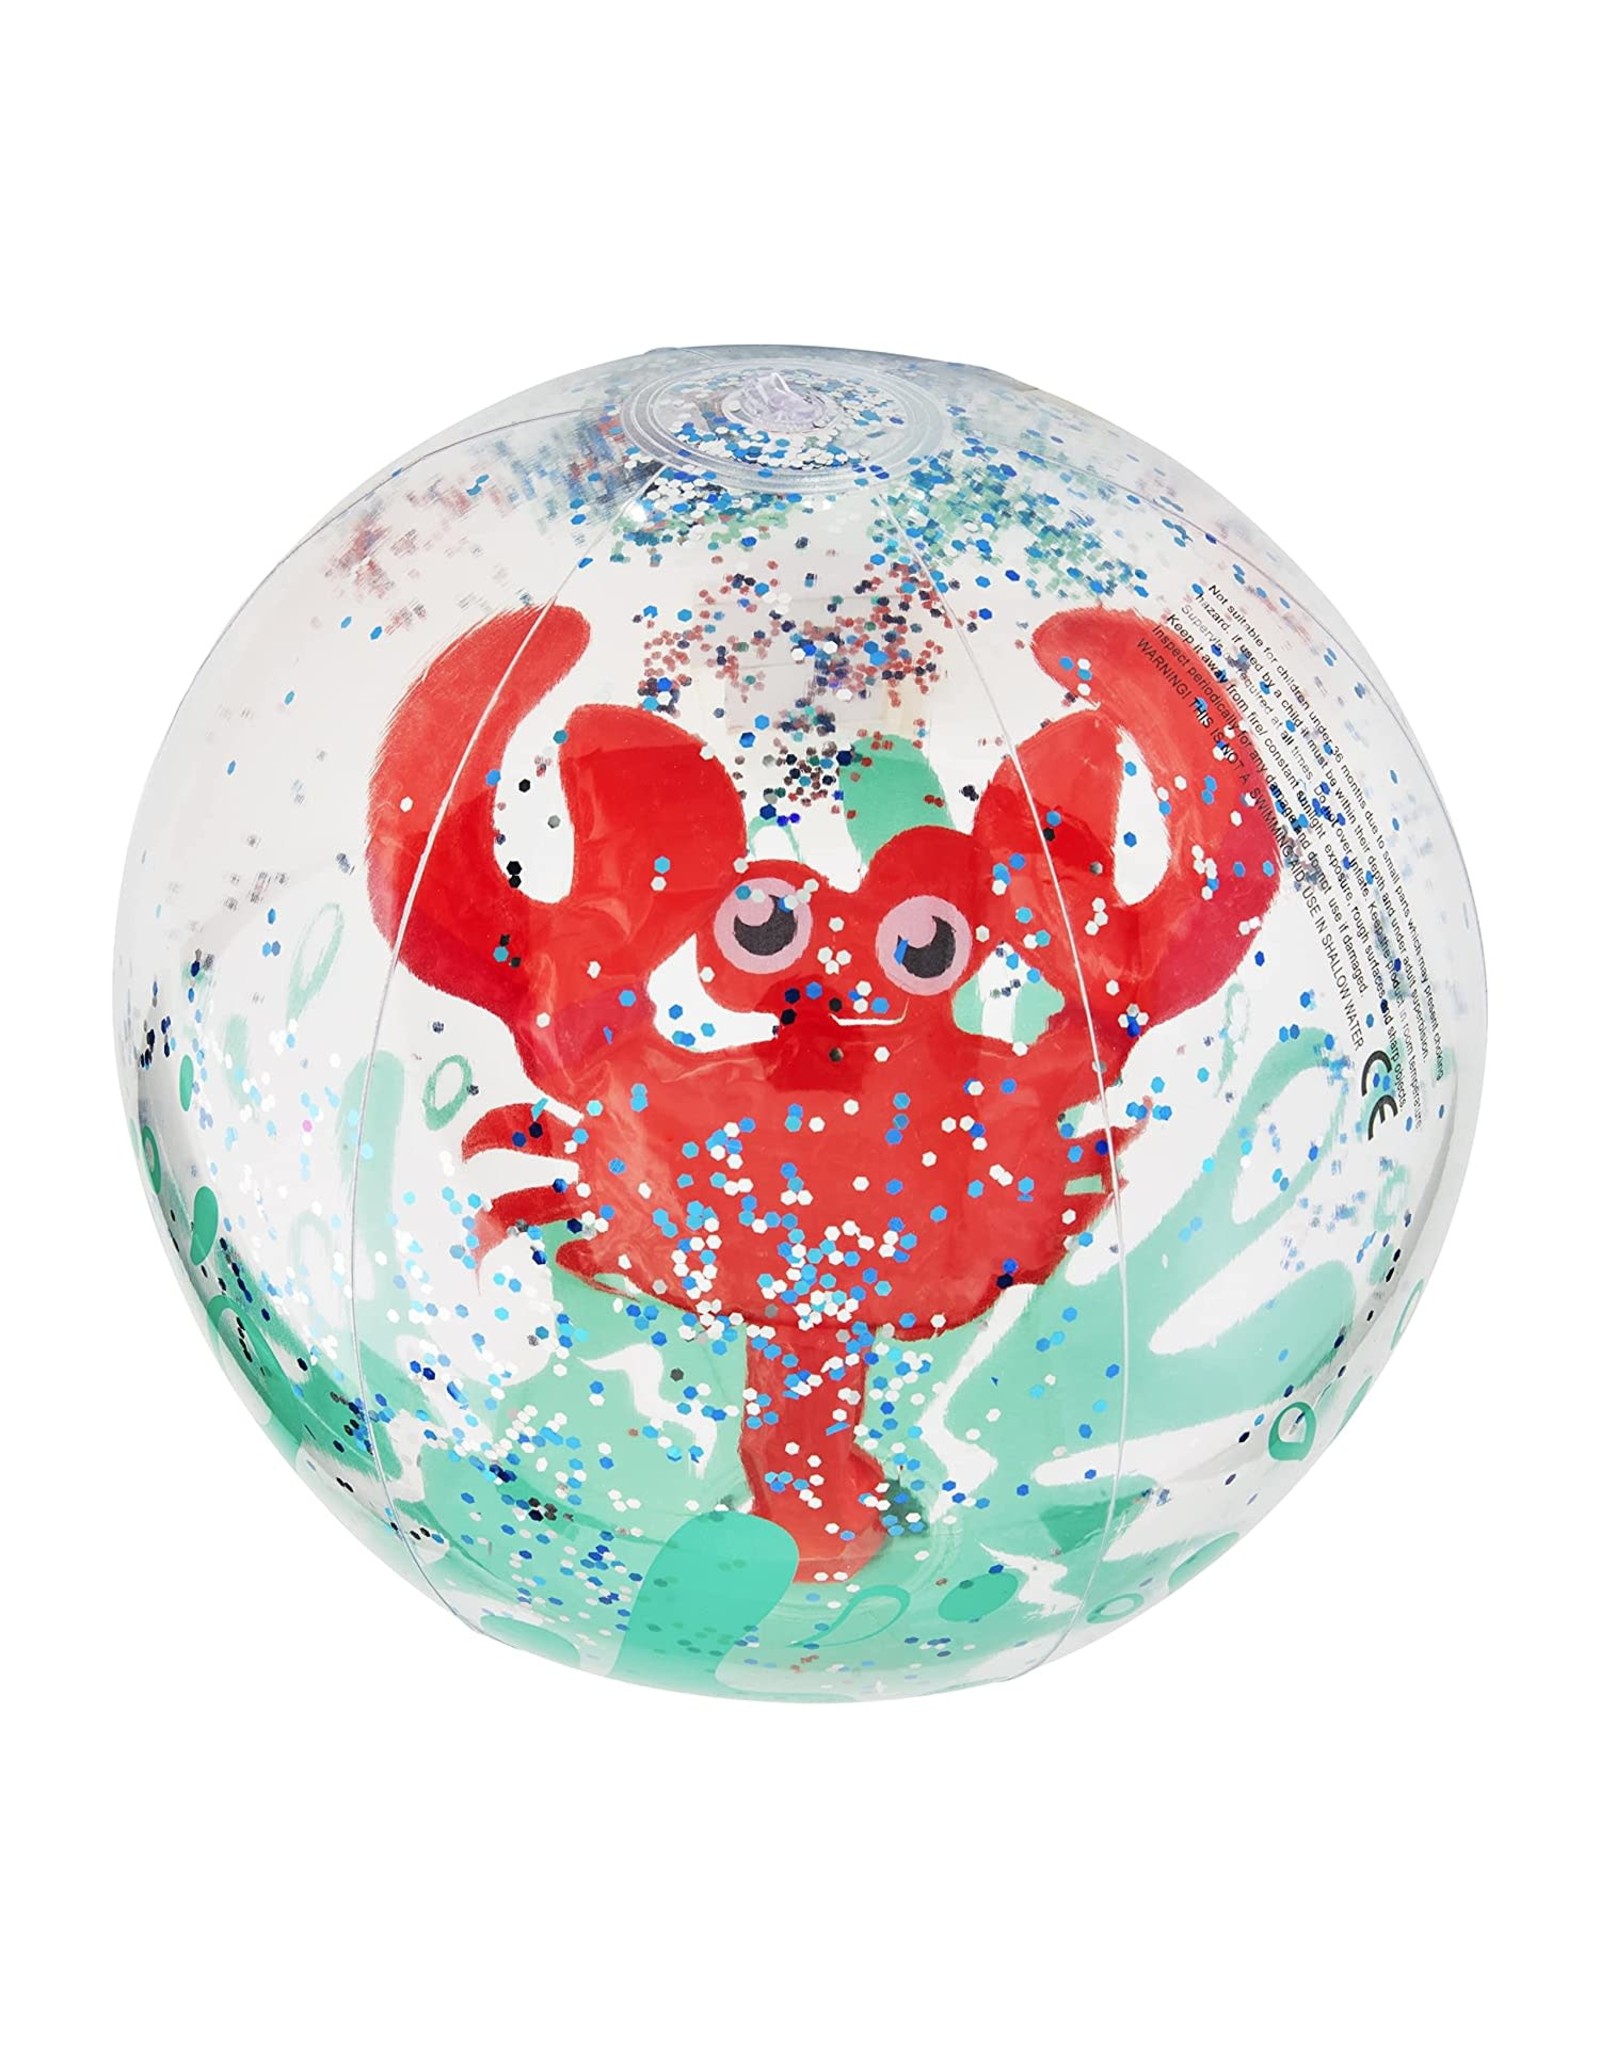 Mud Pie Kids Gifts Glitter Filled Crab Character Beach Ball 12 Inch